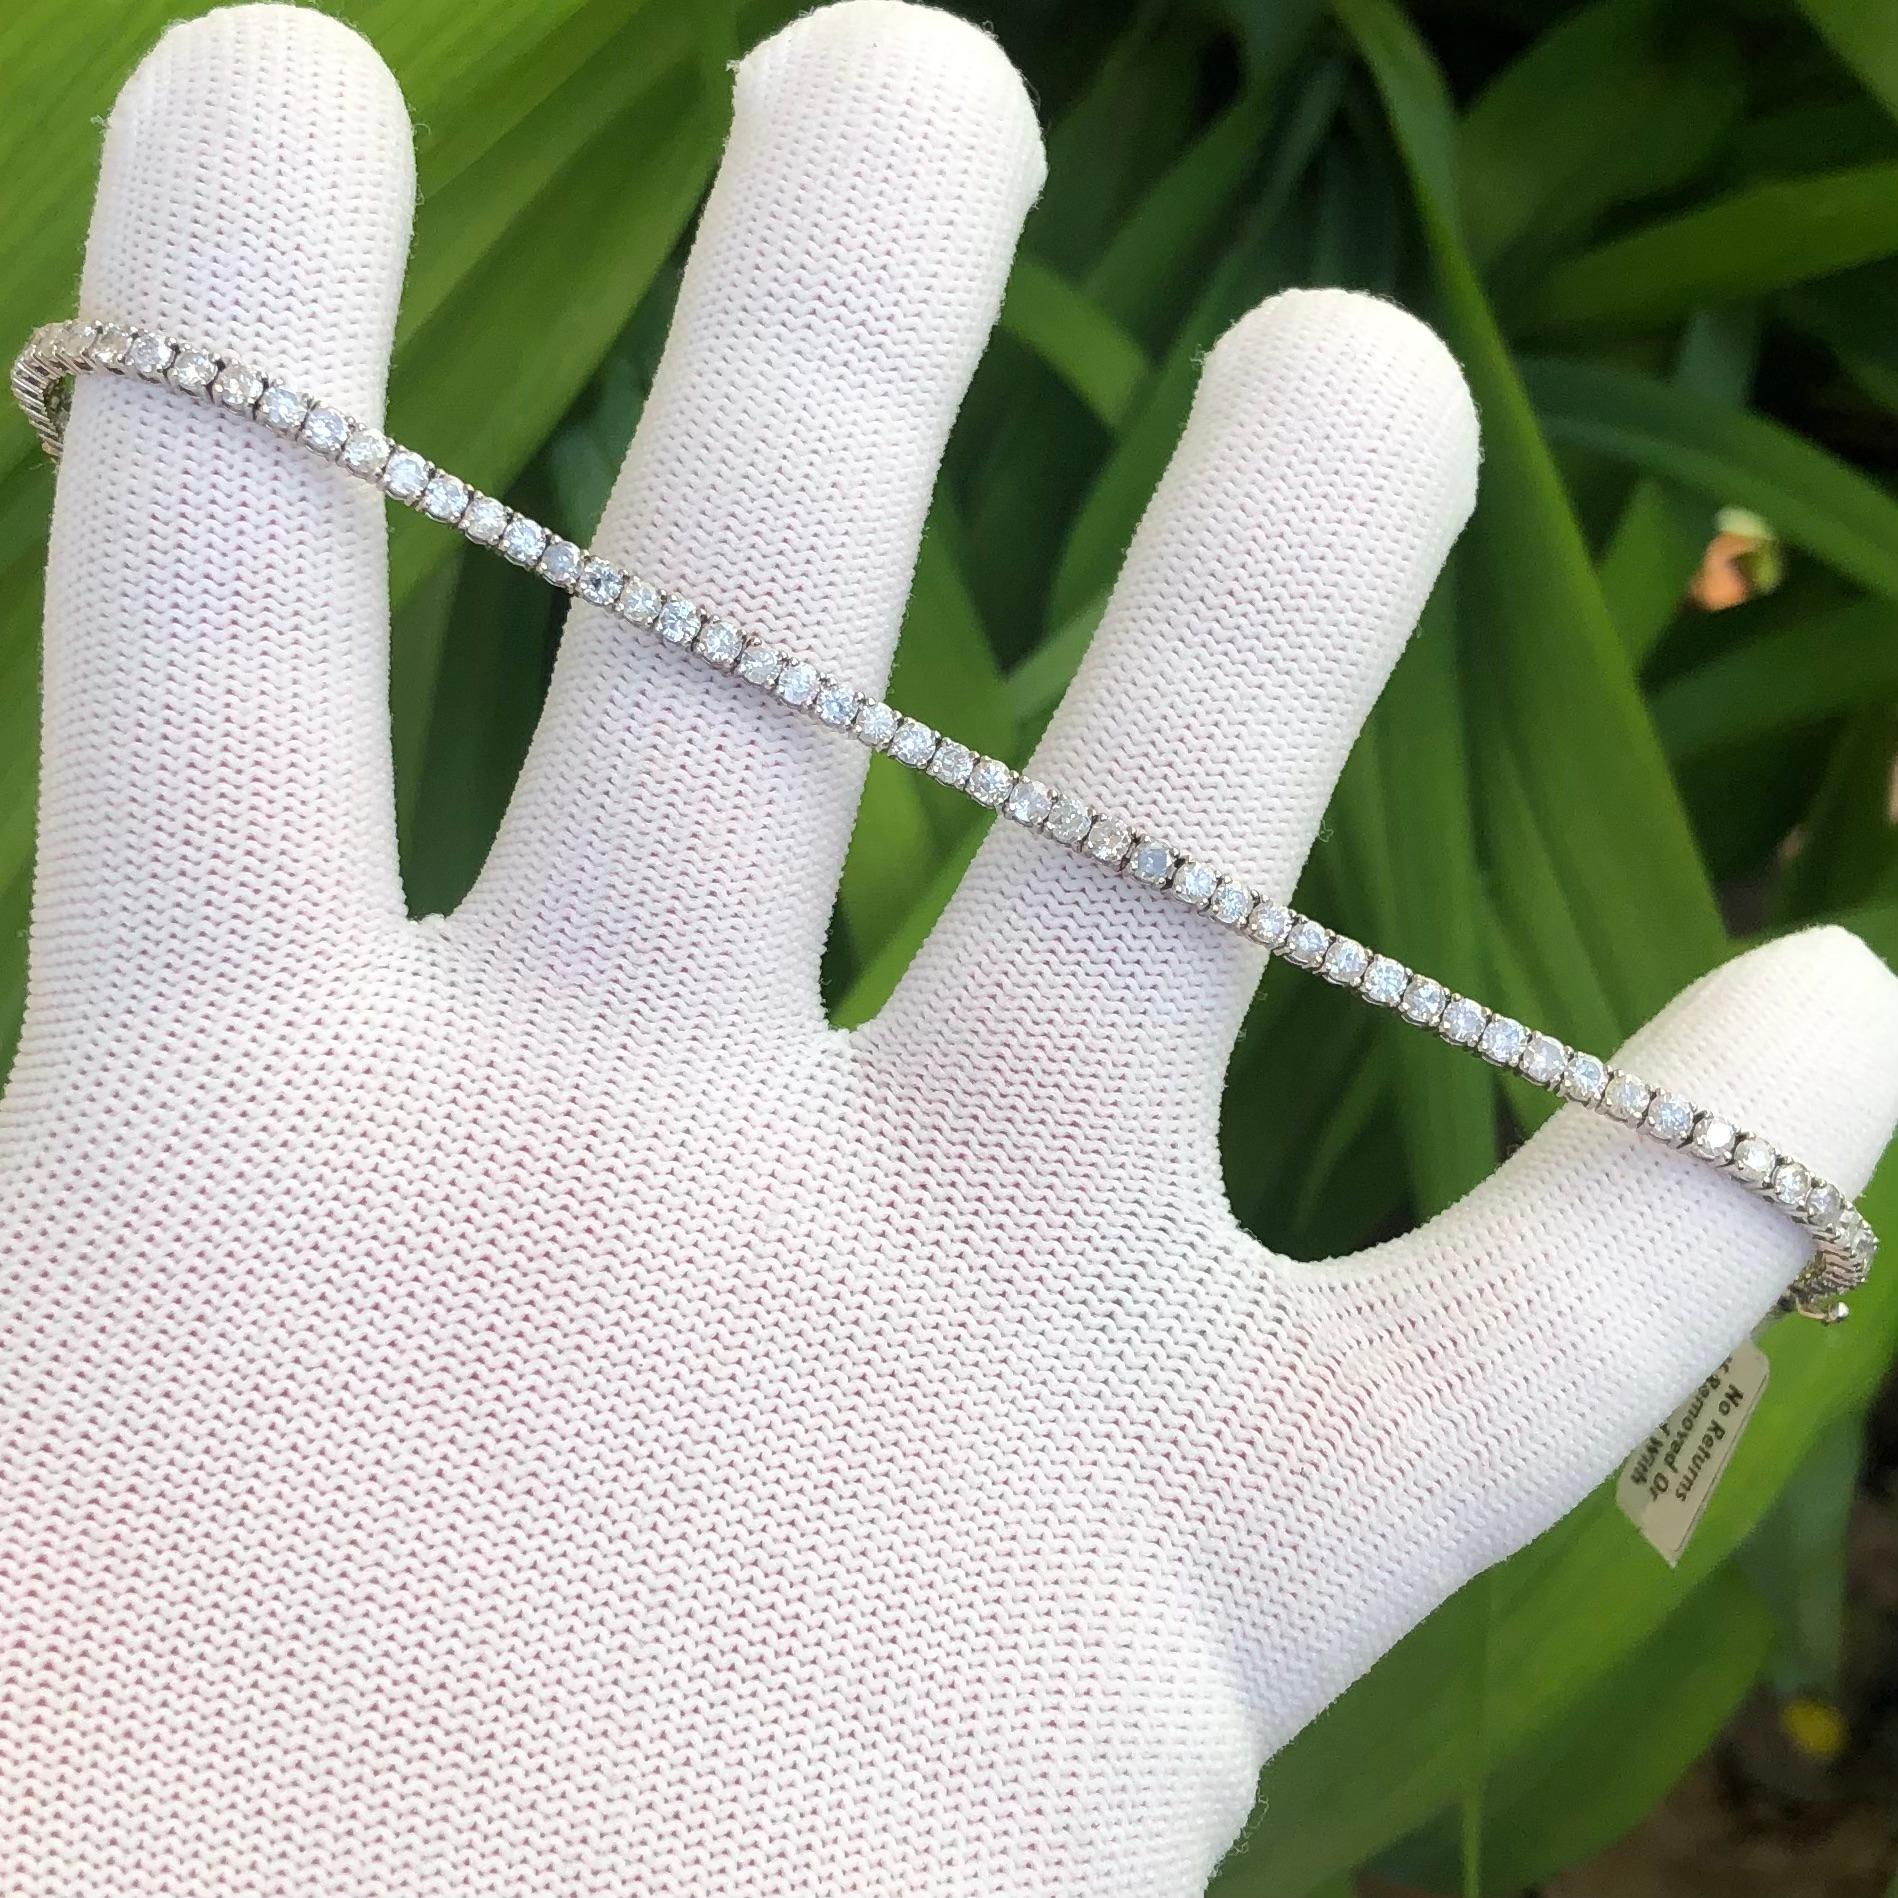 Classic Near 5 1/2 carat round natural diamond tennis link bracelet in 14k white gold. 63 round brilliant natural diamonds (SI-I clarity, natural earth-mined) are hand set in this diamond tennis bracelet weighing near 5 1/2 carats.


This near 5 1/2